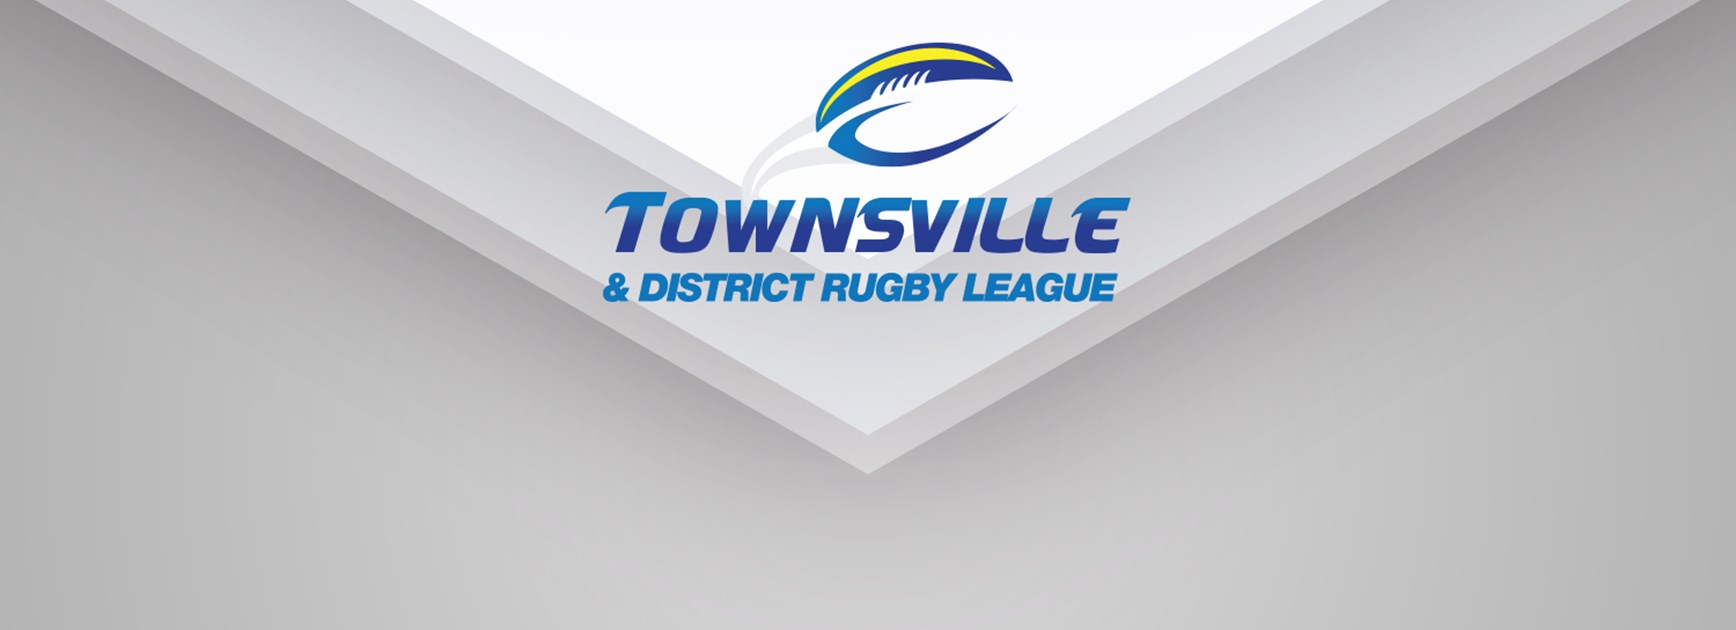 Brothers and Centrals face off for Townsville title